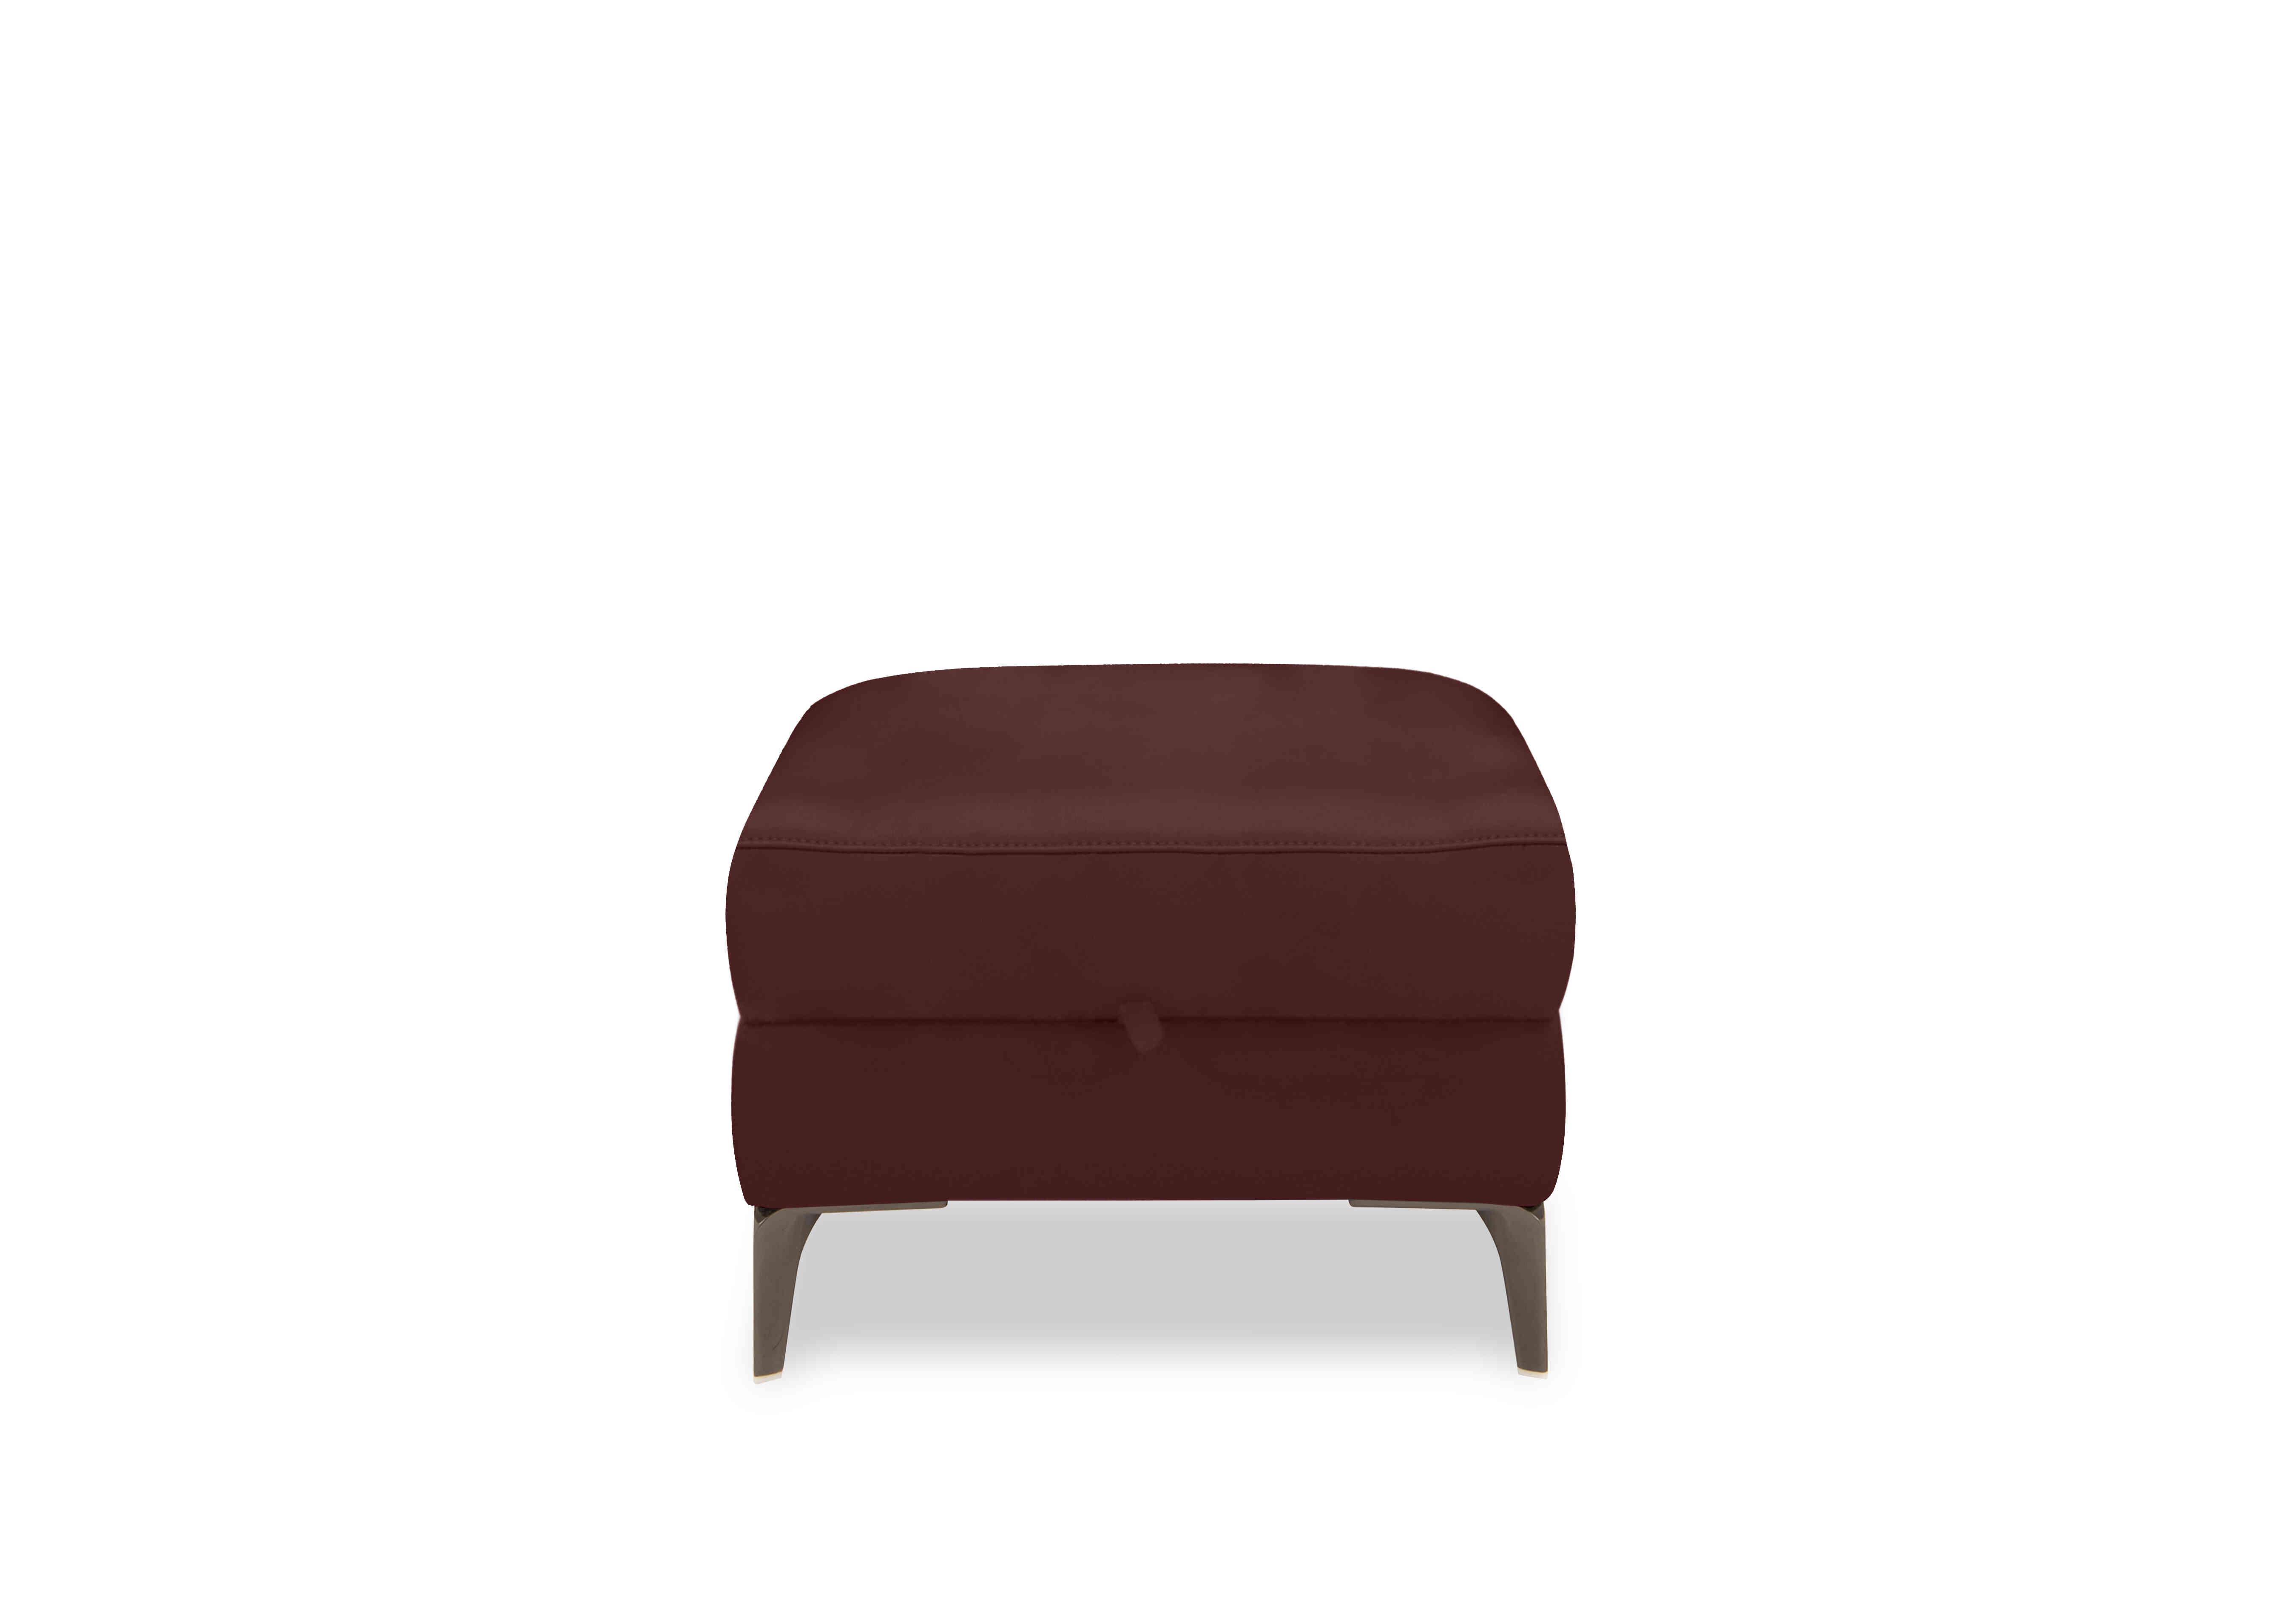 New York Leather Storage Footstool in Bv-035c Deep Red on Furniture Village